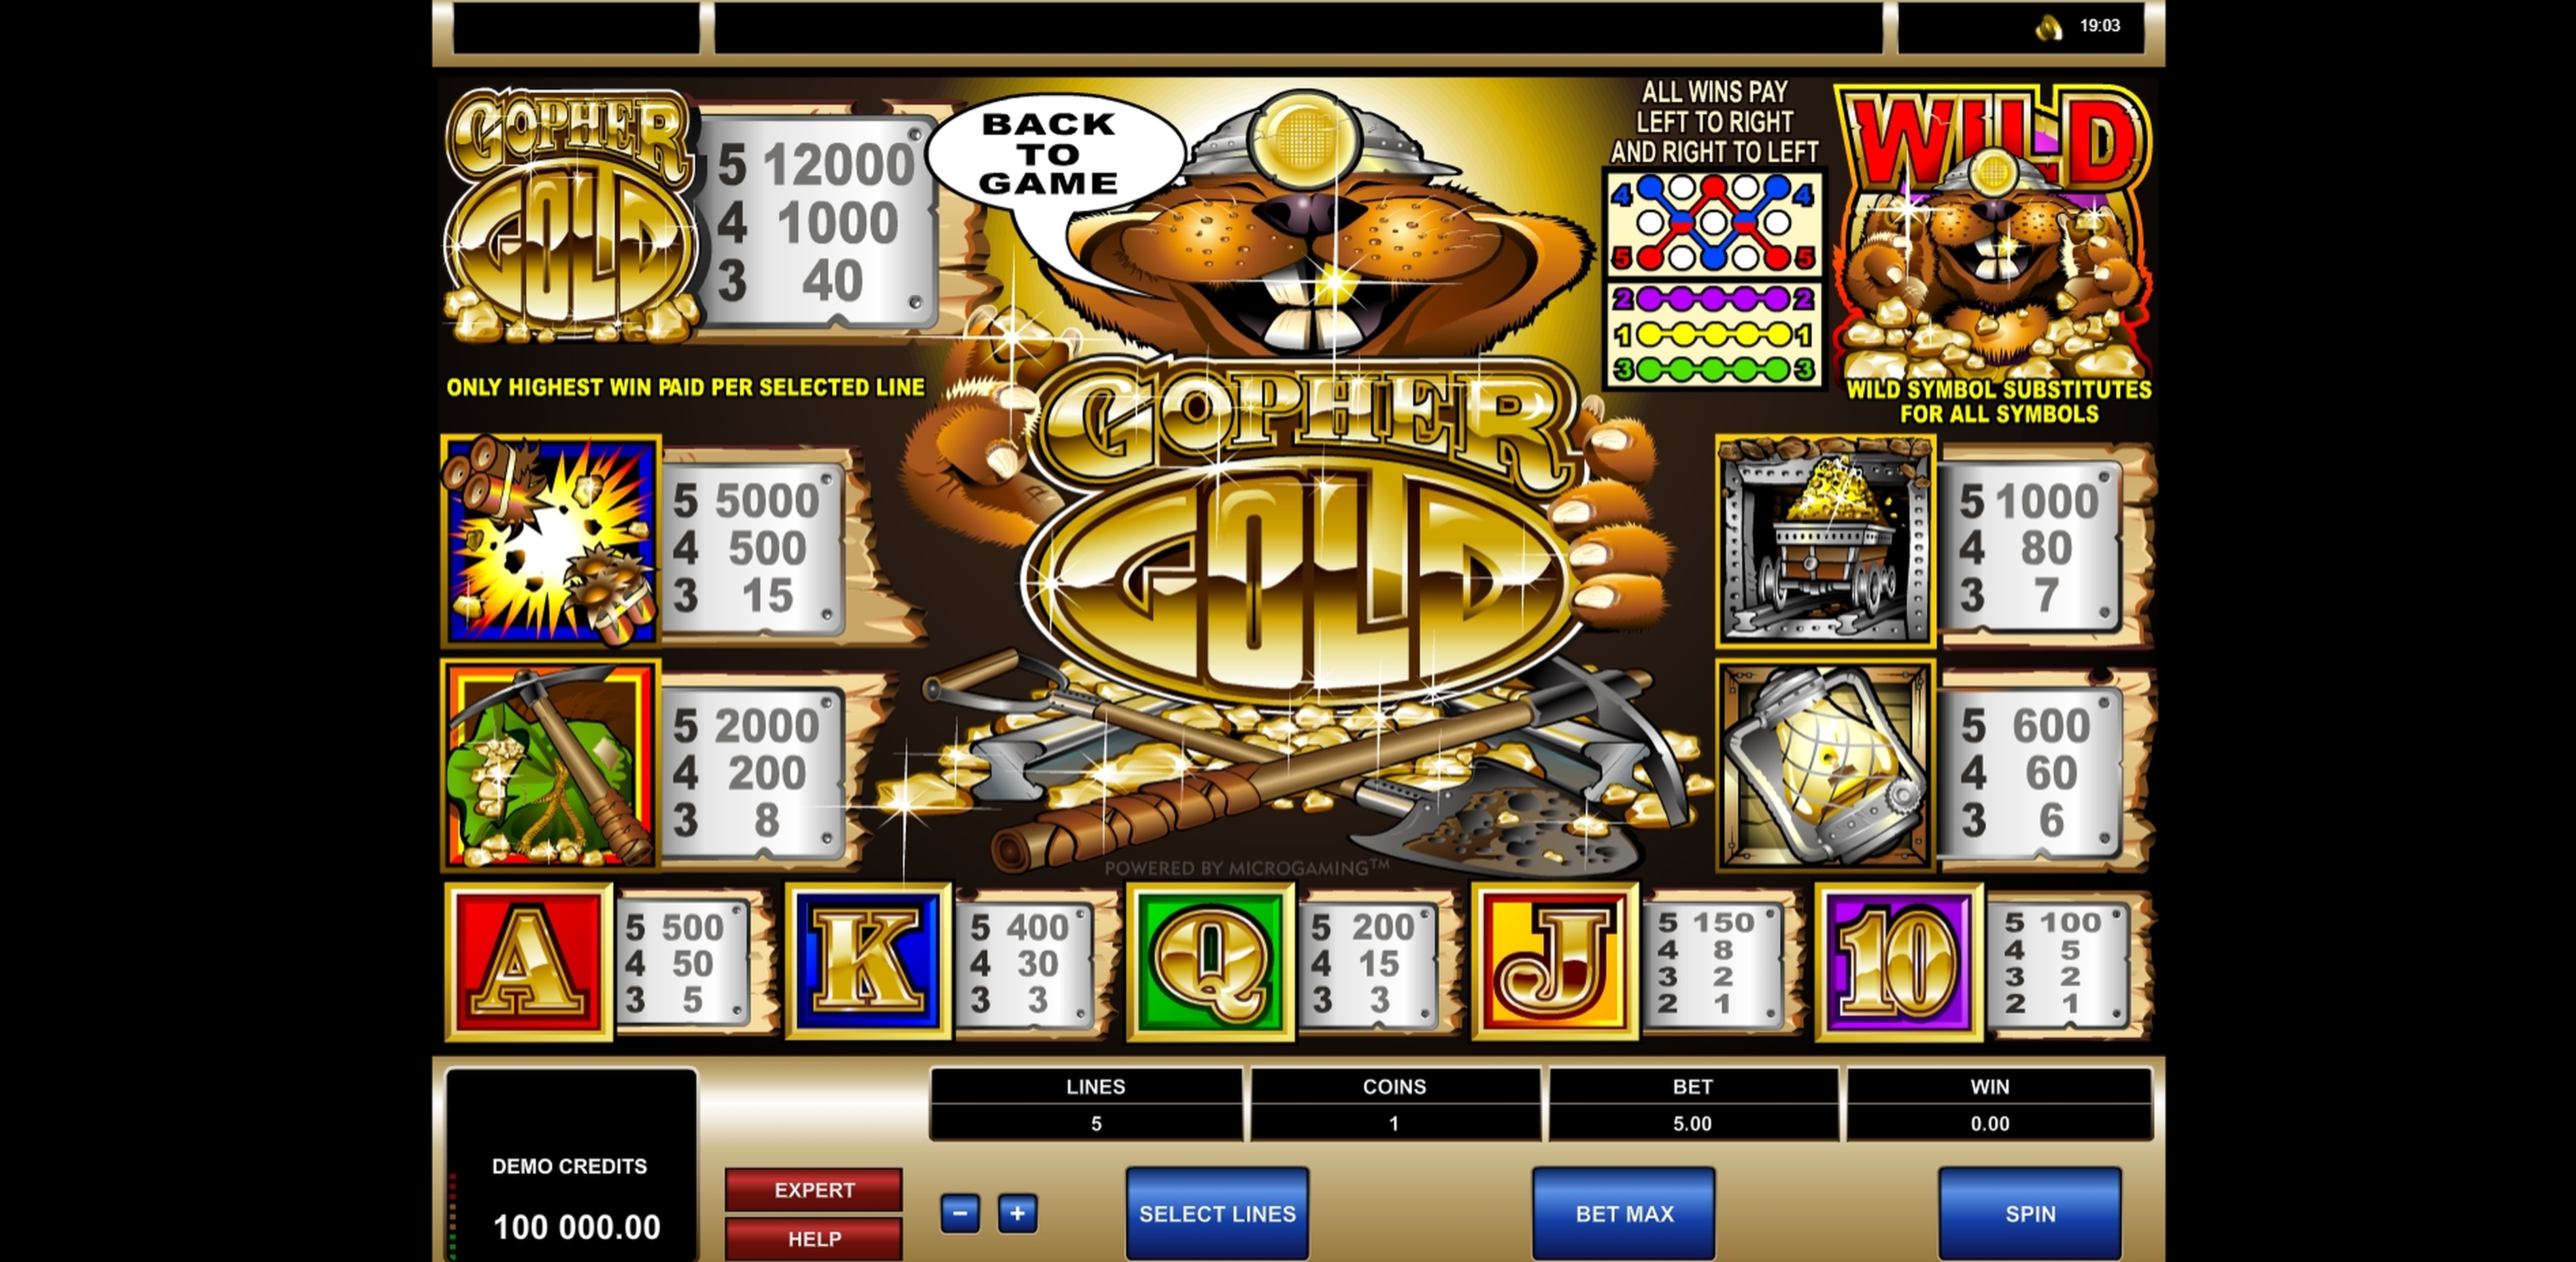 Info of Gopher Gold Slot Game by Microgaming